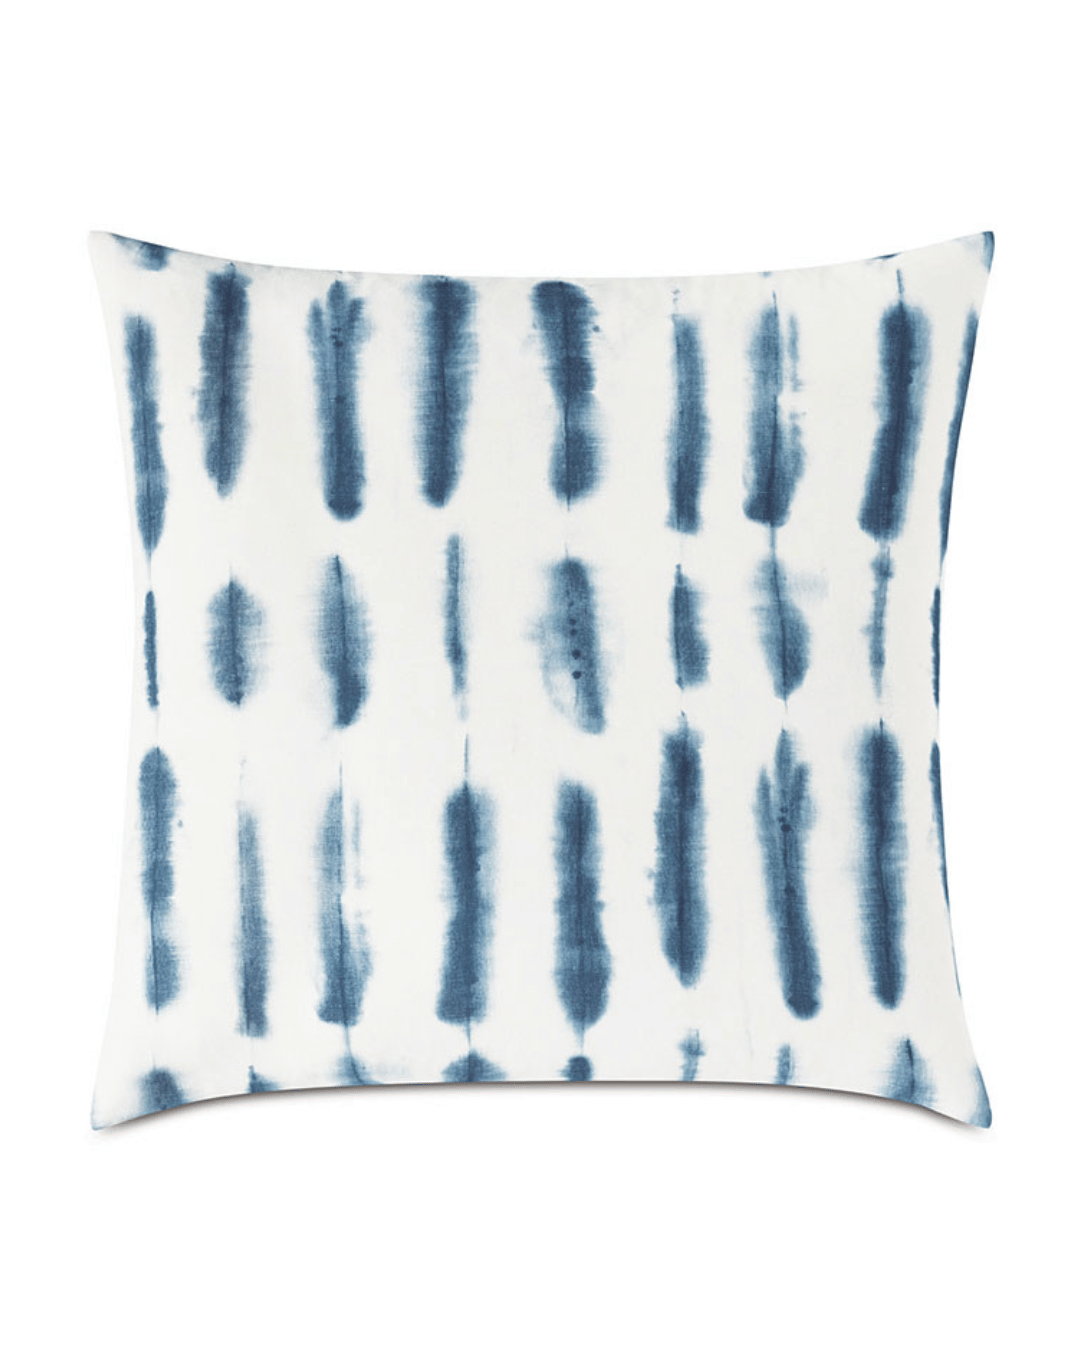 Abstract Blue Euro Sham 27x27 by Eastern Accents, with a white background and a pattern of irregular blue vertical stripes, resembling a watercolor or tie-dye effect, perfect for a Scottsdale Arizona bungalow.